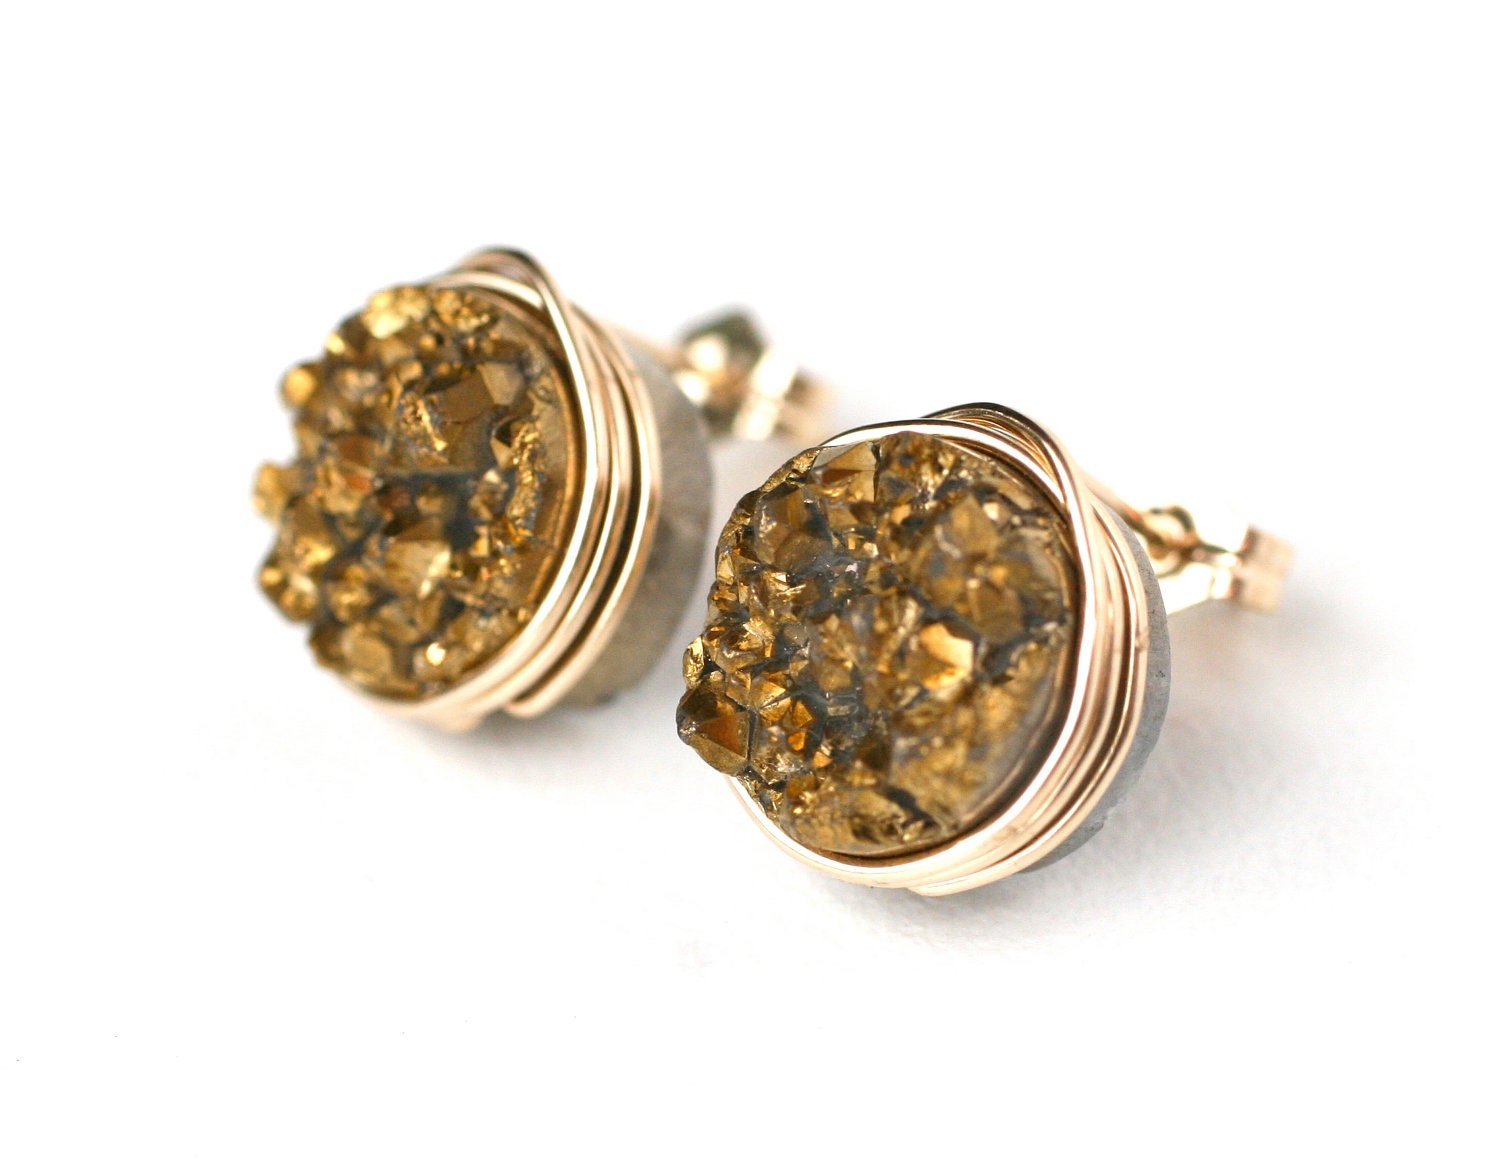 Gold Rush Druzy Quartz Stud Earrings Wire Wrapped Post 14k Gold Filled - Gift for Her, Under 25 dollars